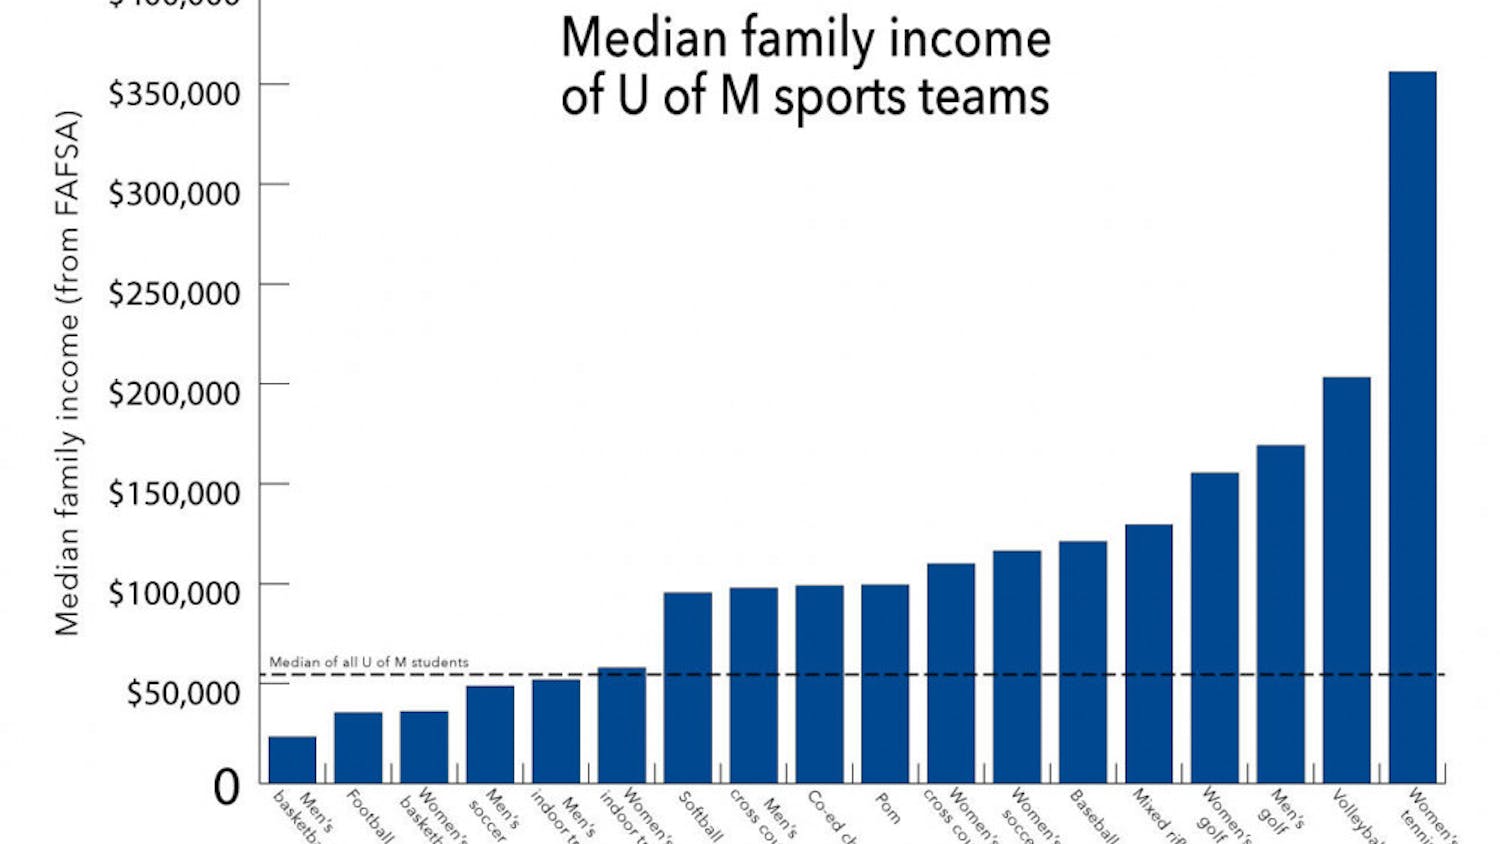 Family income of U of M student-athletes